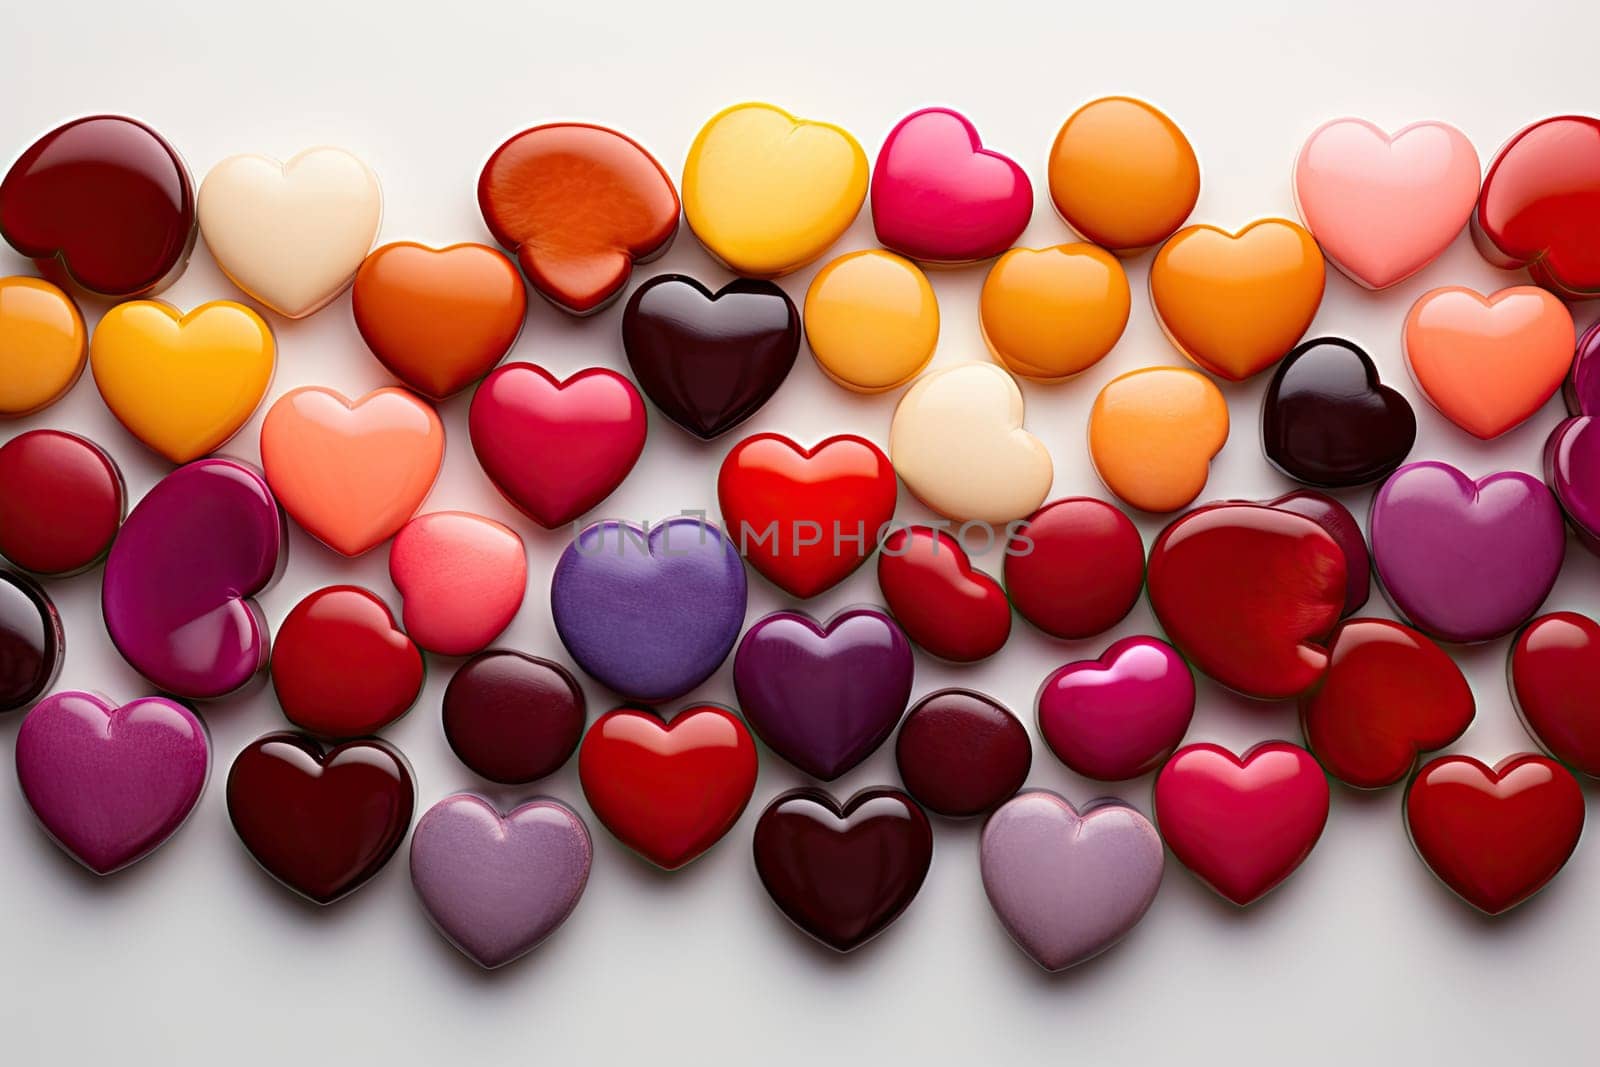 many different colored hearts on a white background for valentine's day or other occasions to celebrate the love in your life